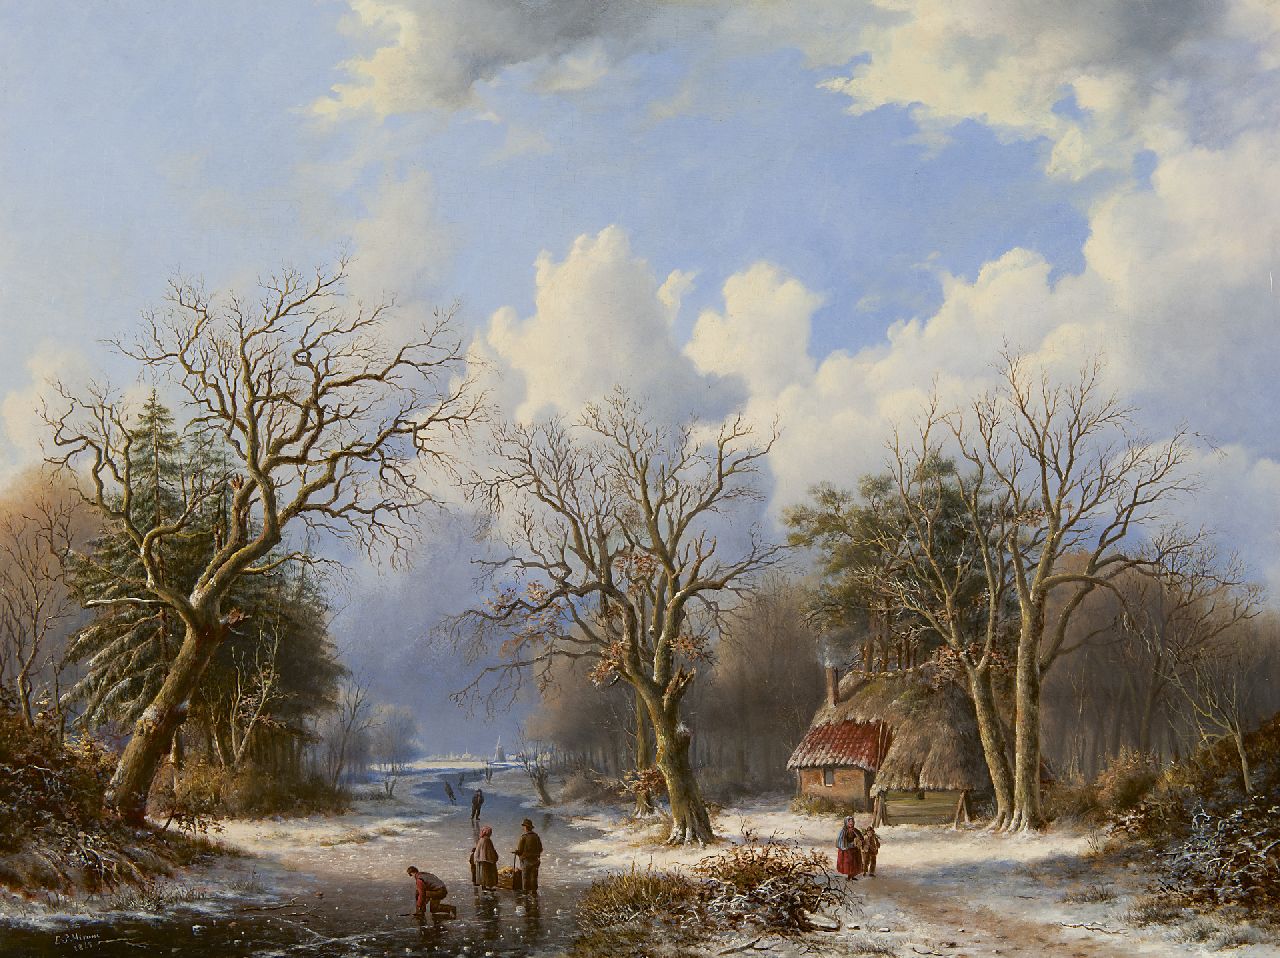 Mirani E.B.G.P.  | 'Everardus' Benedictus Gregorius Pagano Mirani, A winter landscape with skaters on the ice, oil on panel 47.5 x 62.5 cm, signed l.l. and dated 1845